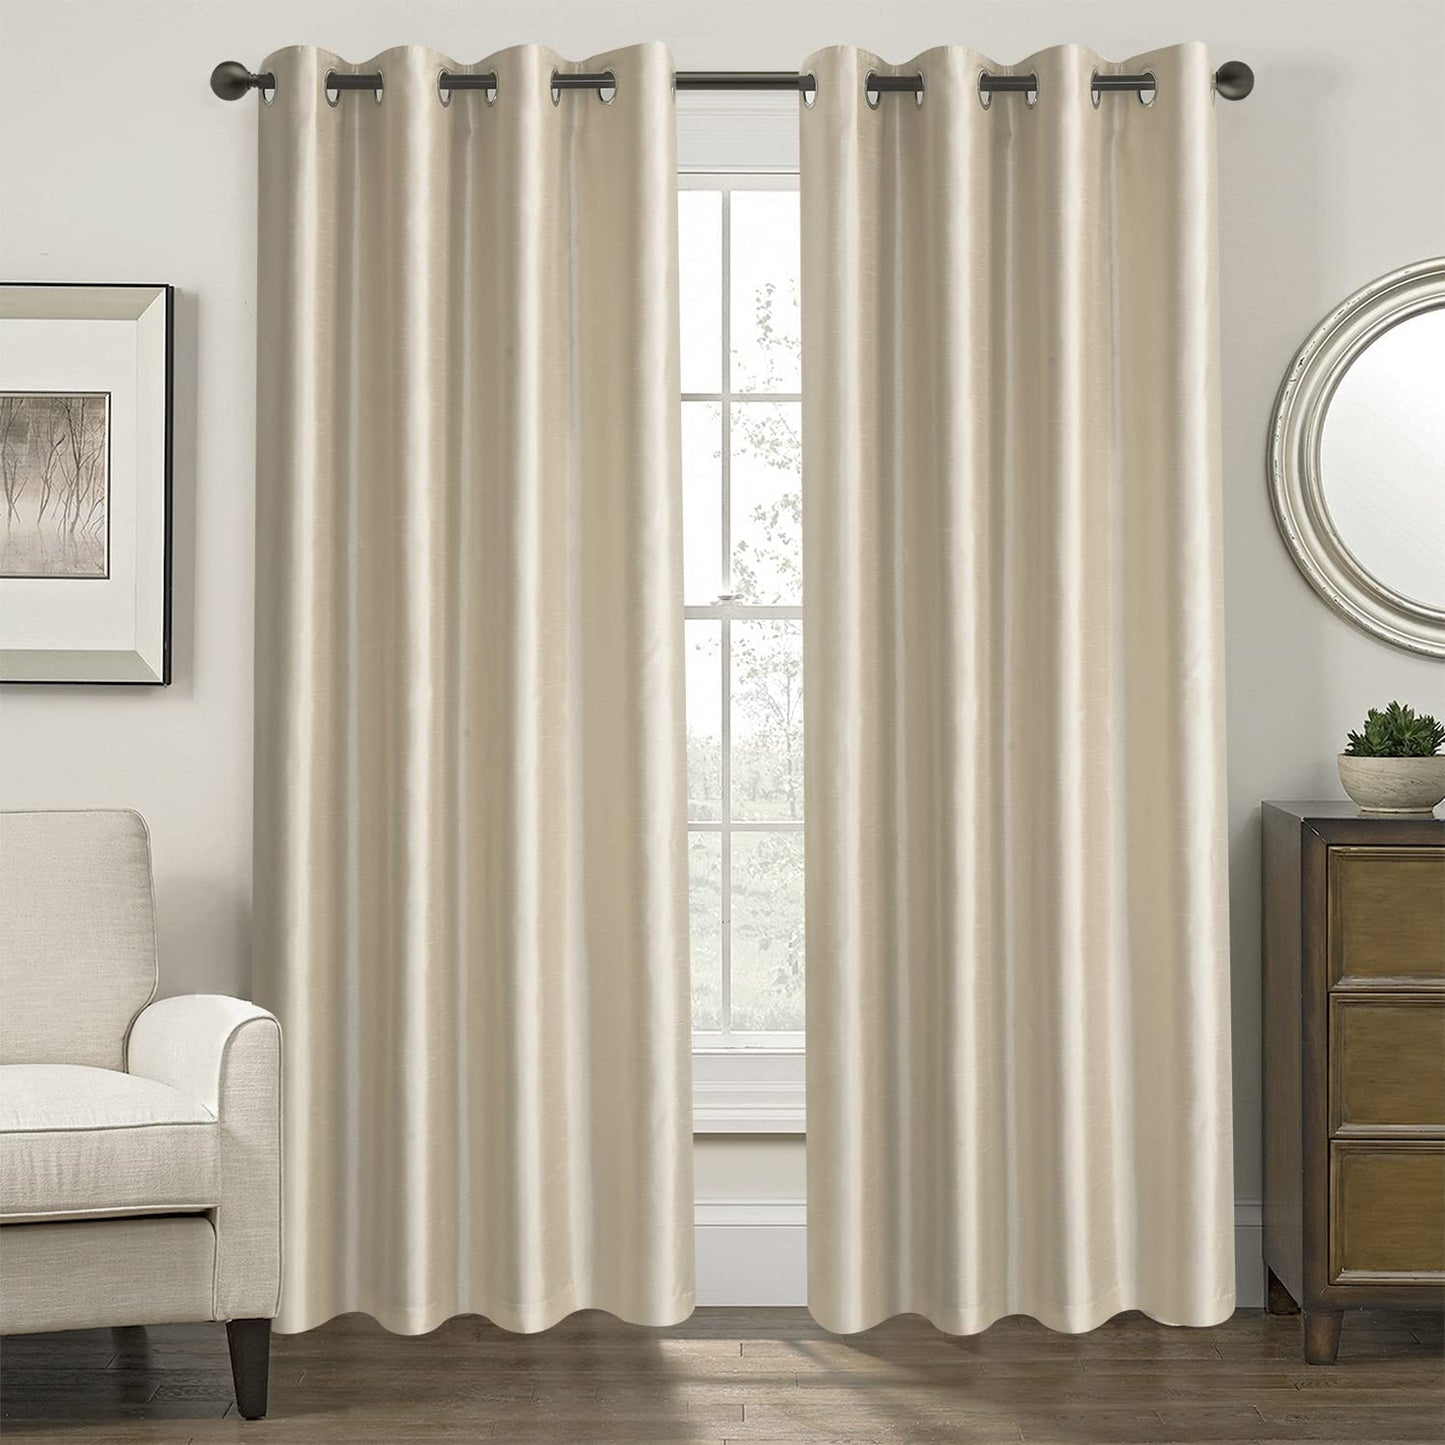 Faux Silk Extra Wide Blackout Curtains,Fully Beige Lined Solid Color Window Treatment Drapes For Patio Door,1 Panel